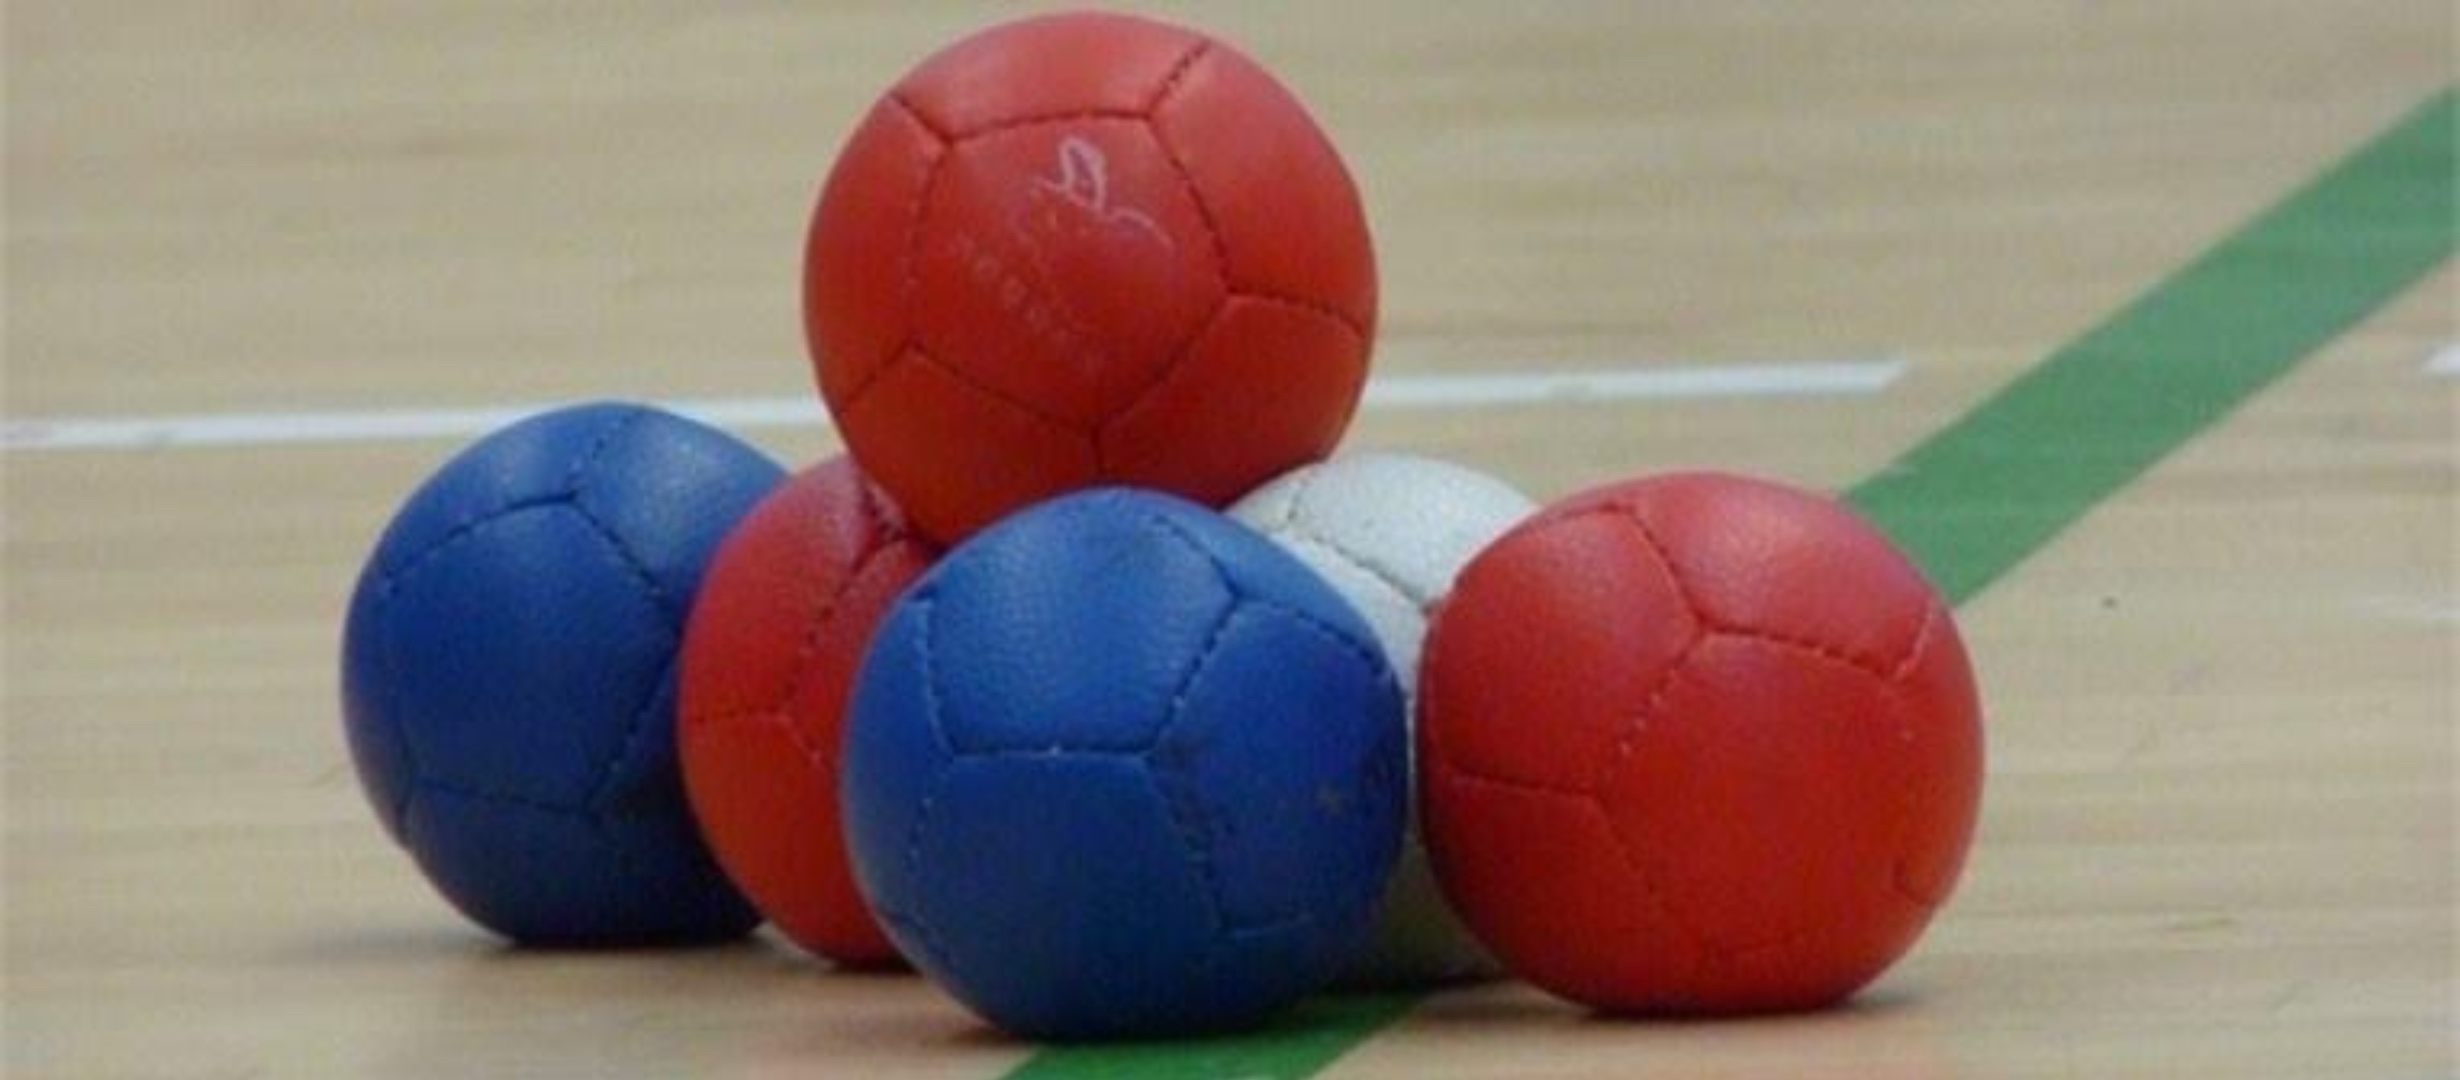 A group of 5 boccia balls, two blue, two red and one white with another red ball balanced on top